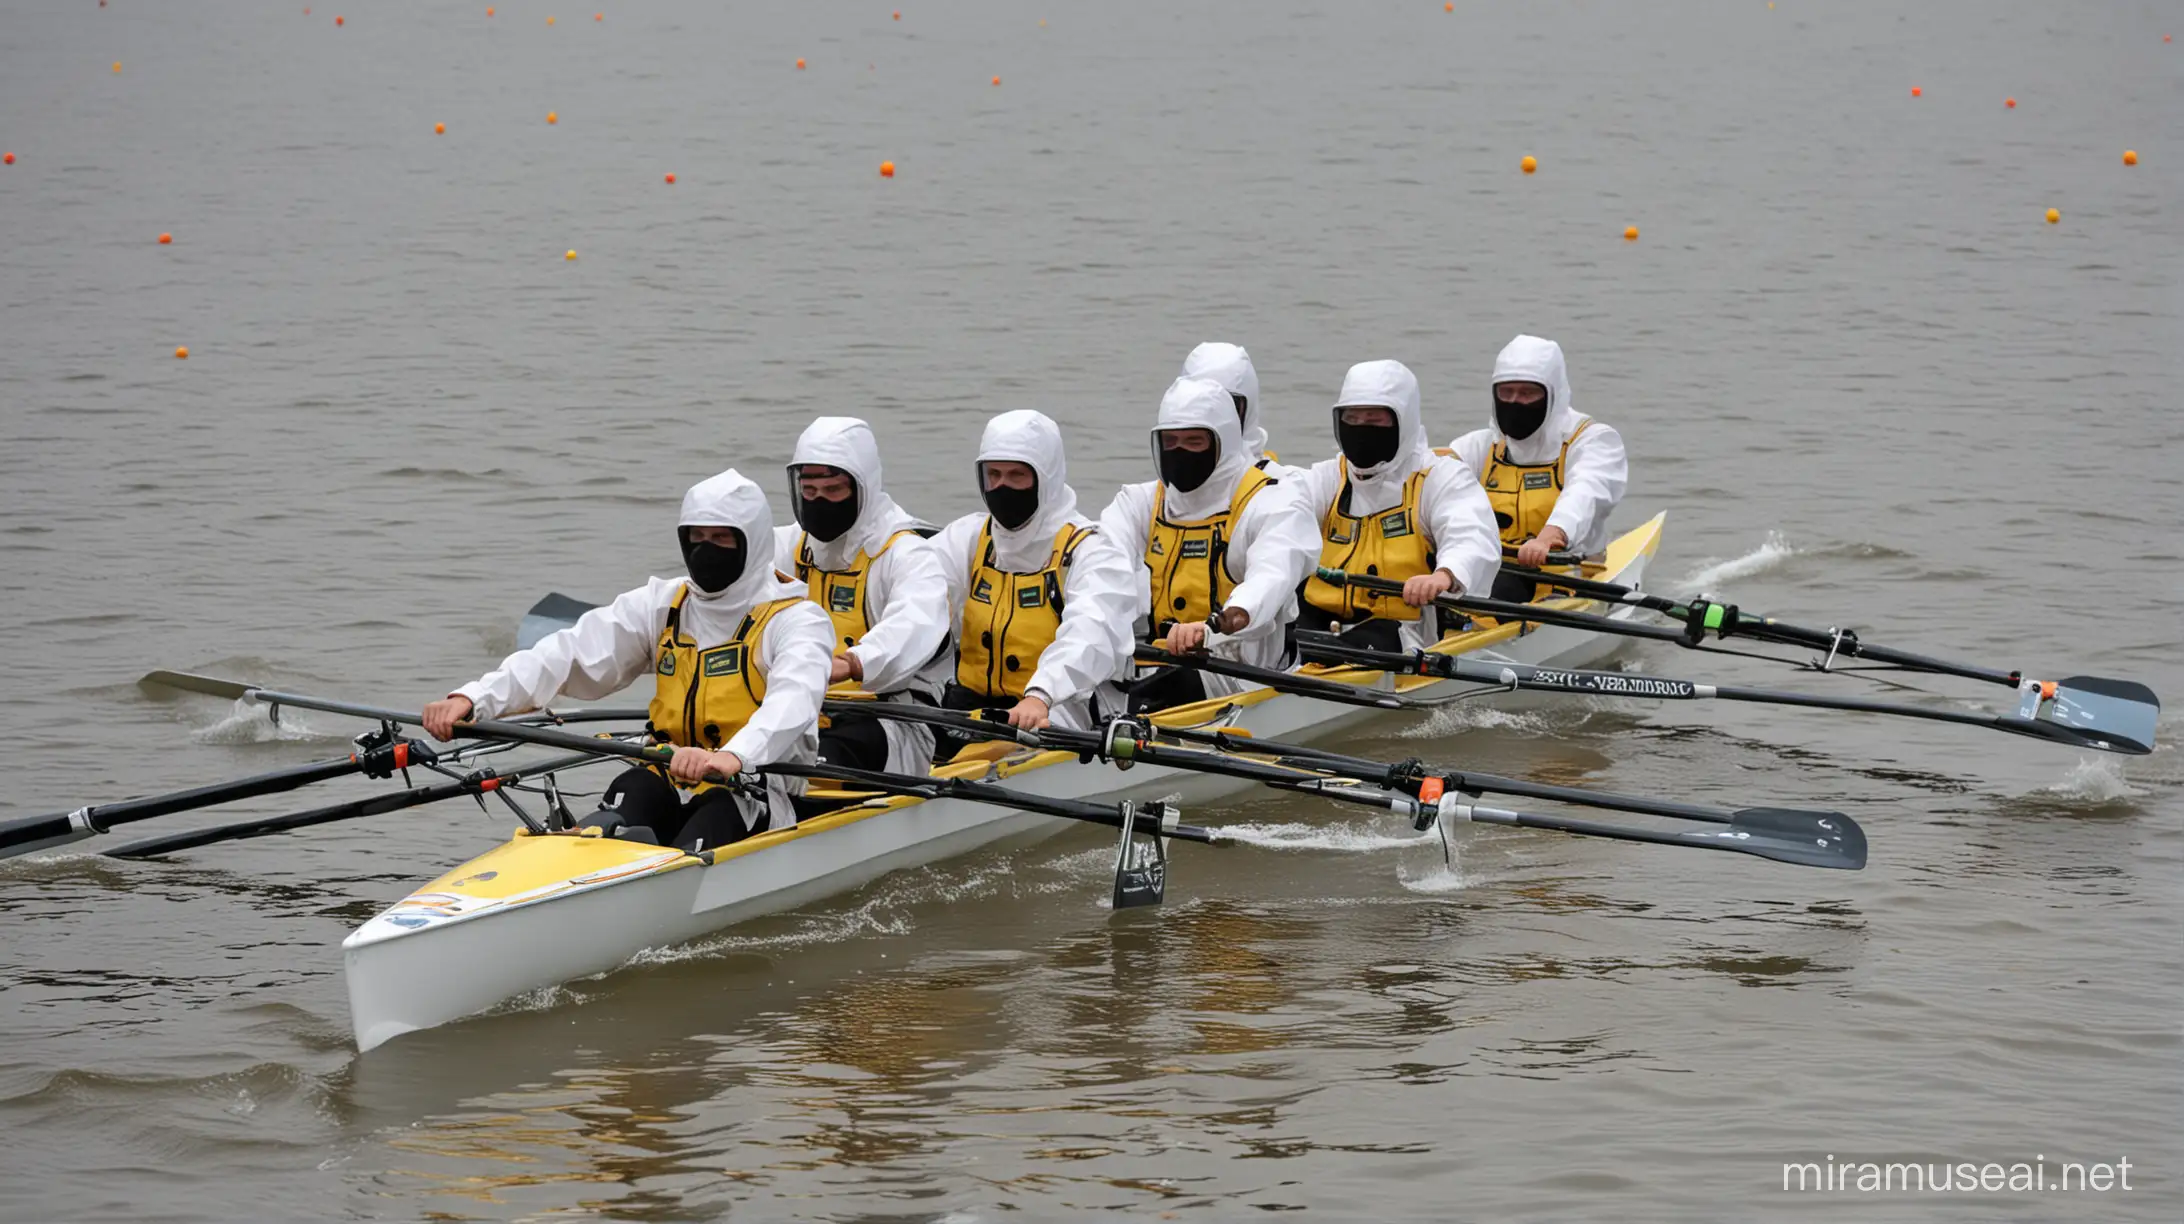 HazmatSuited Rowers Powering Through a Competitive 8Oared Race